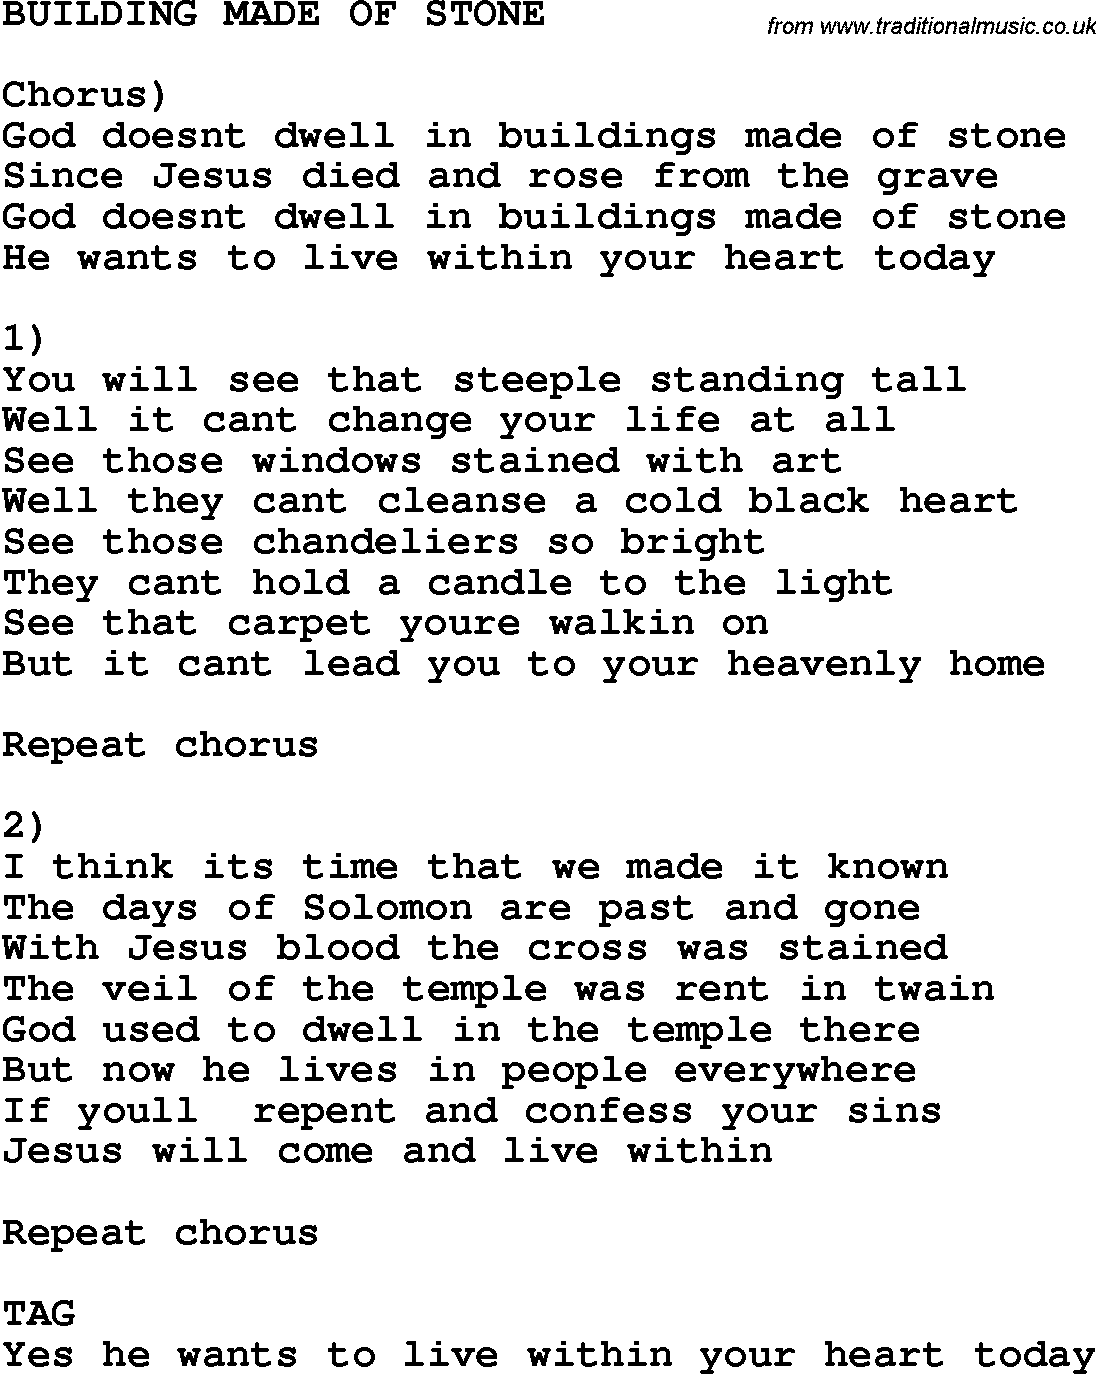 Country, Southern and Bluegrass Gospel Song Building Made Of Stone lyrics 